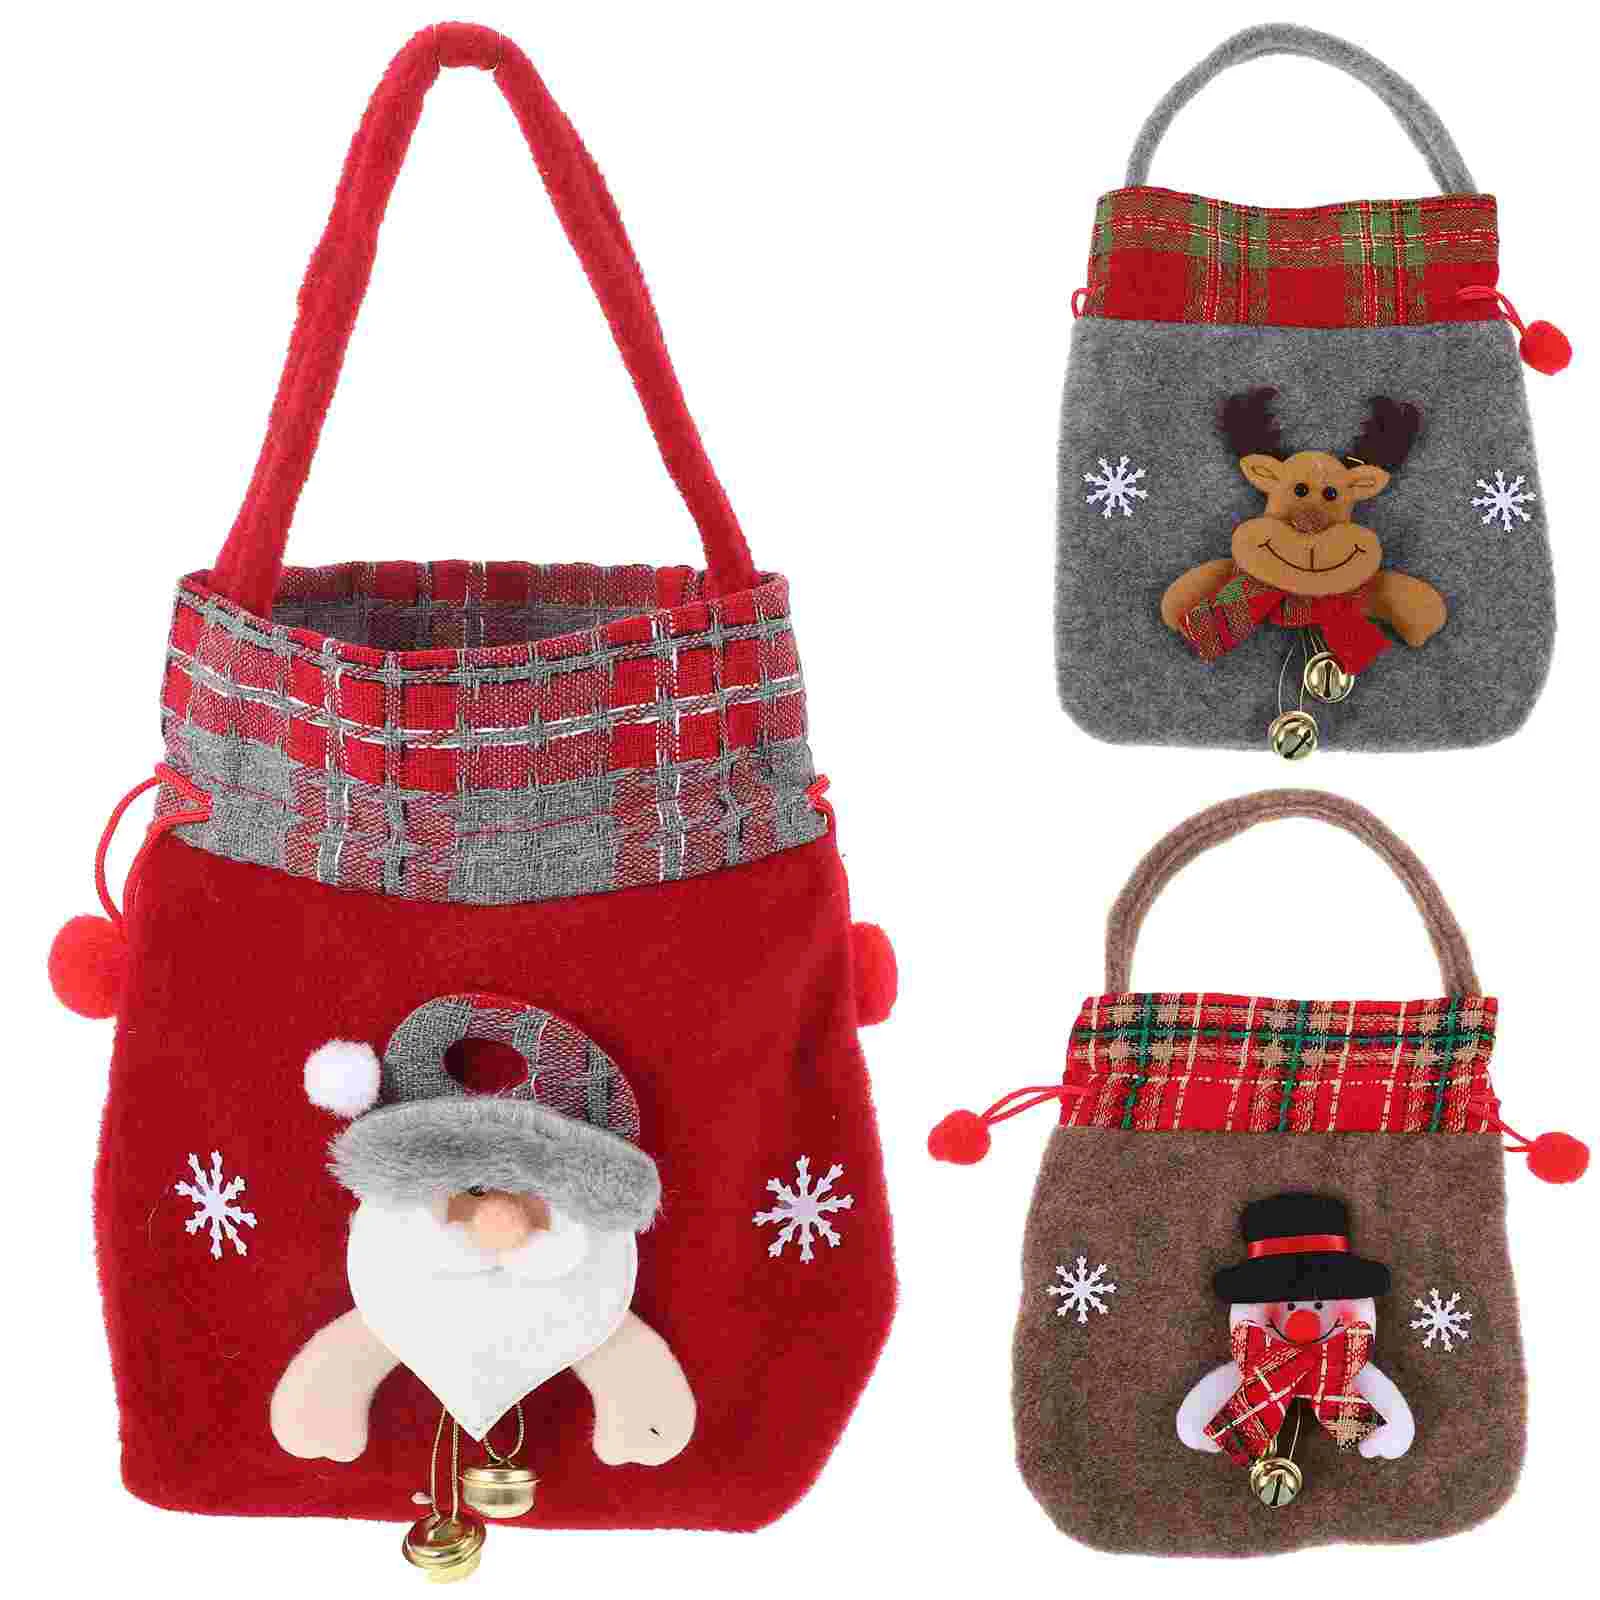 

3 Pcs Gift Xmas Bag Drawstring Bags Christmas Goodie Decorate Treat Cookies Wrapping Small Elder